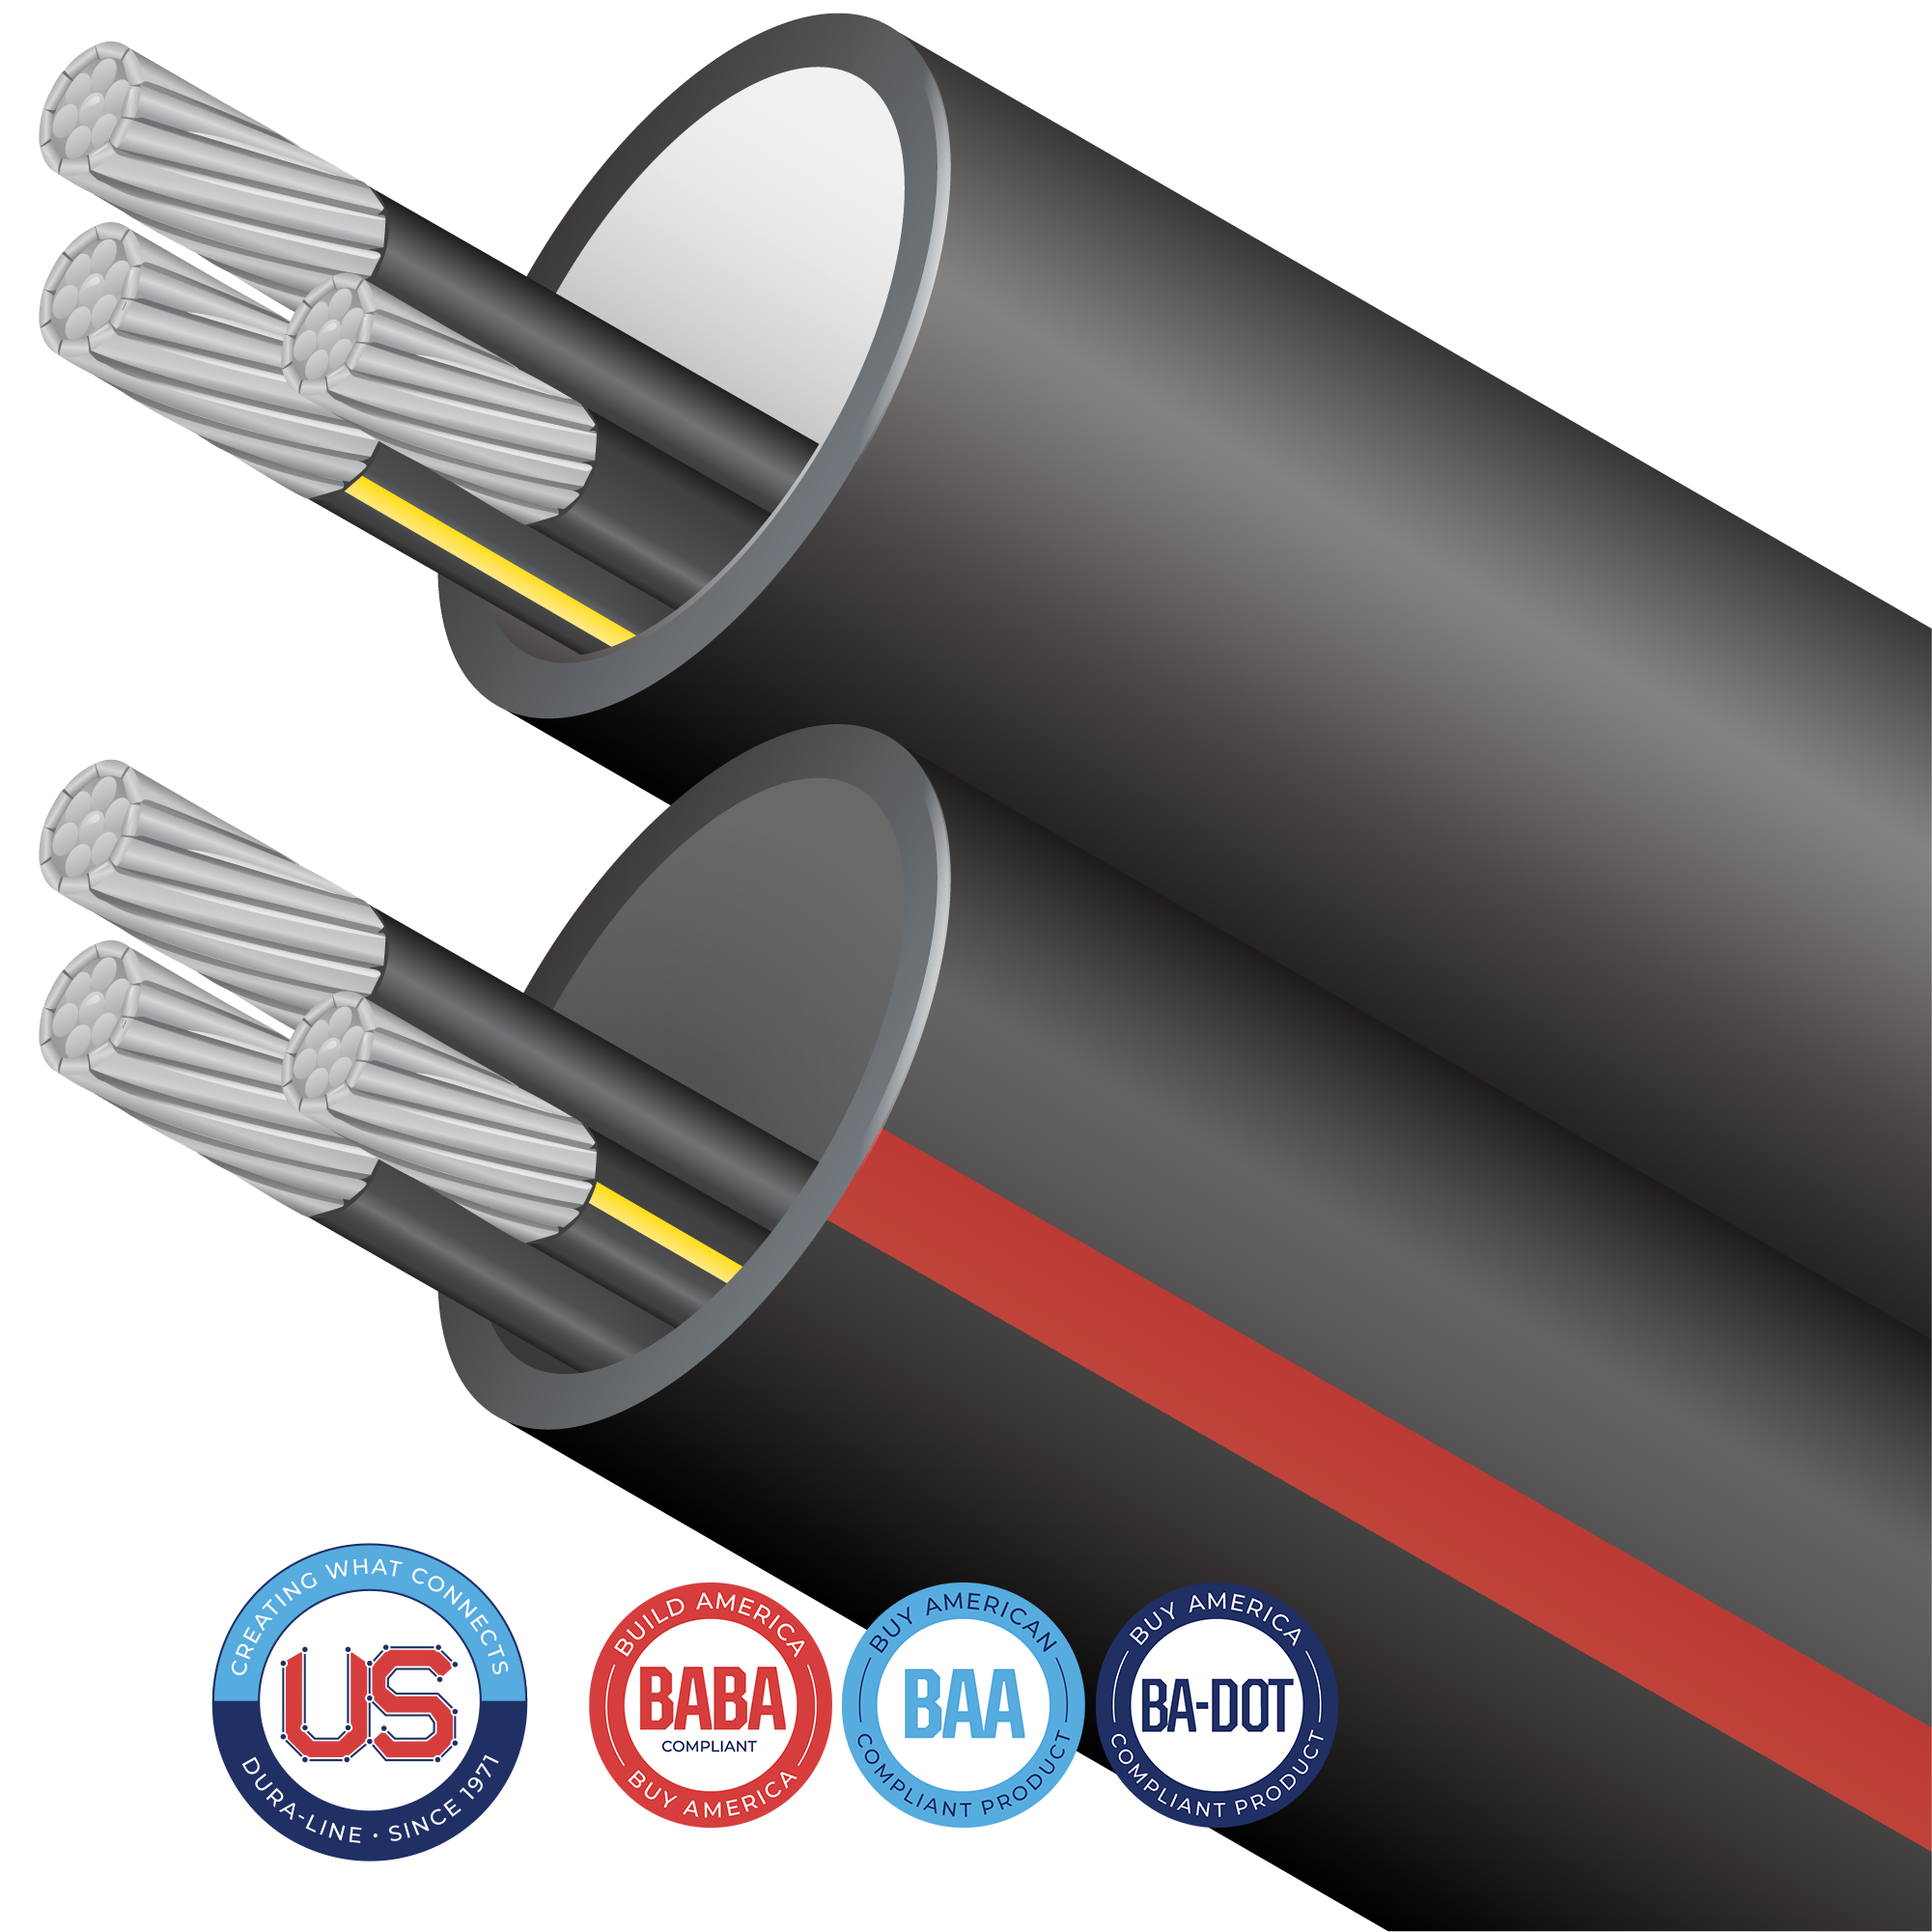 With Cable-in-Conduit (CIC), the cable of your choice is factory pre-installed allowing for one-step placement of conduit and cable.